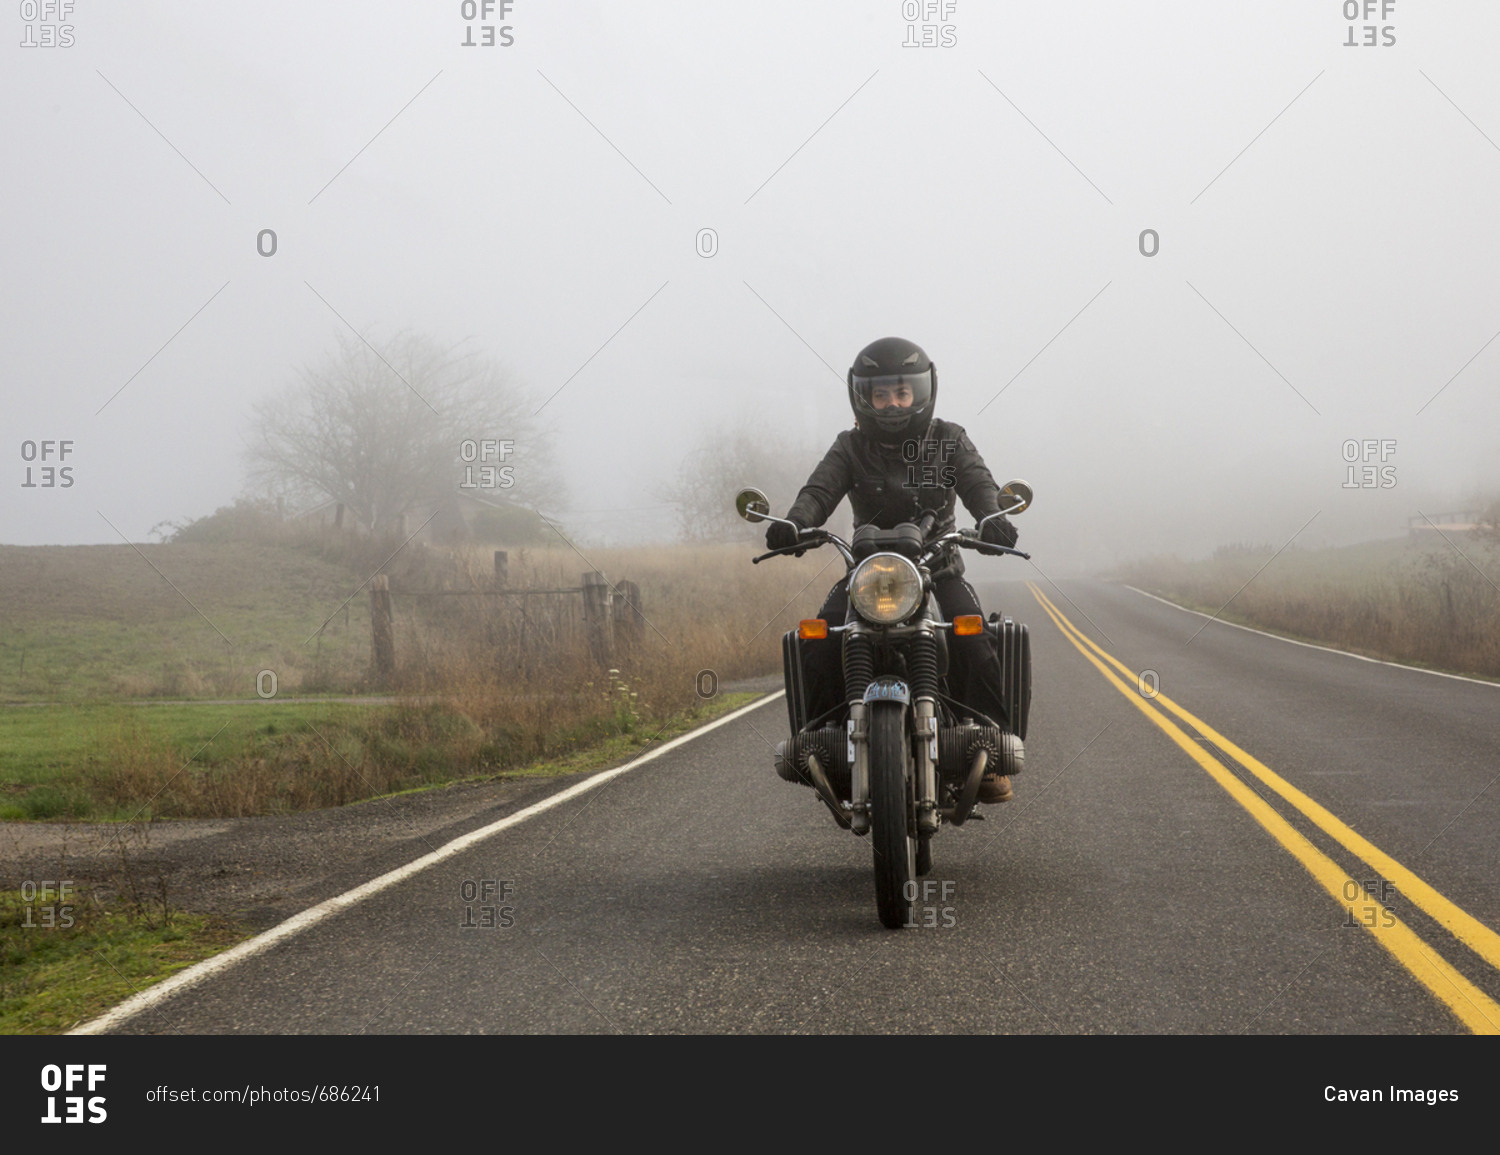 Female biker riding motorcycle on country road during foggy weather